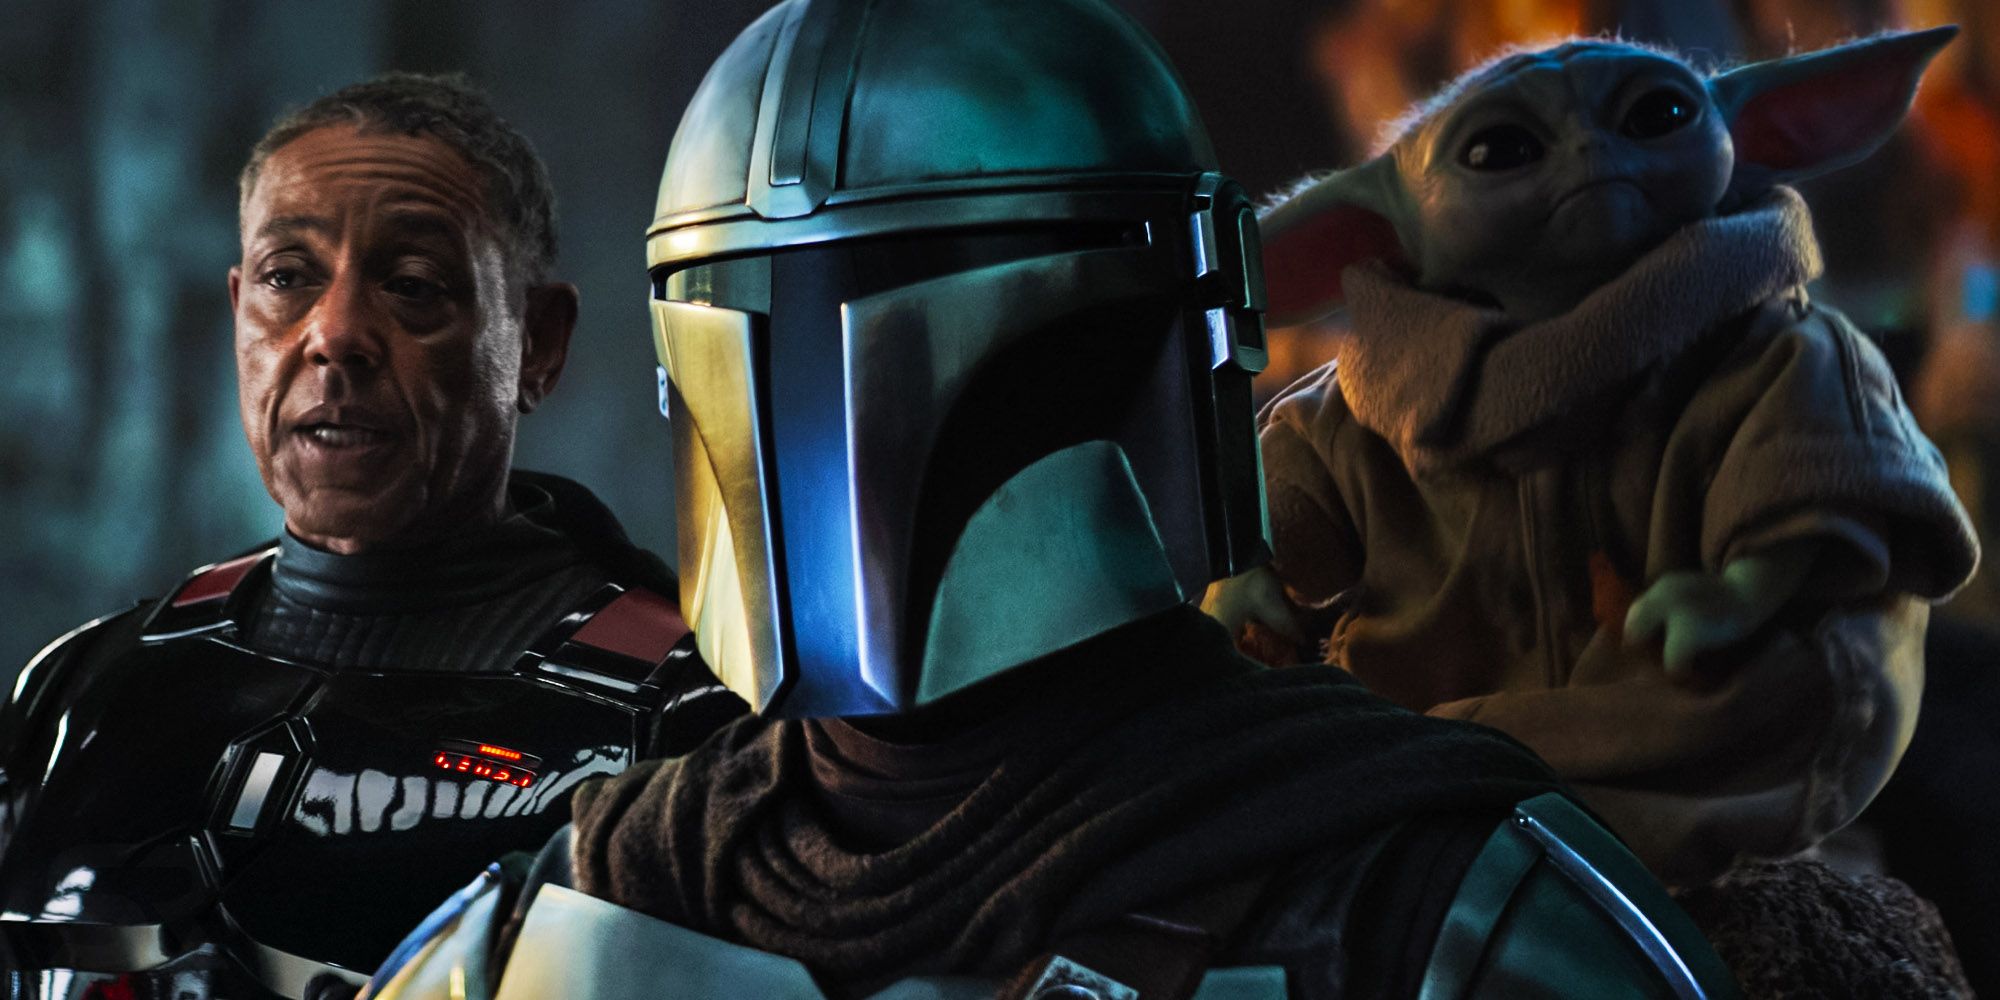 The Mandalorian Season 3 Episode 1 Gives Star Wars An Injection Of